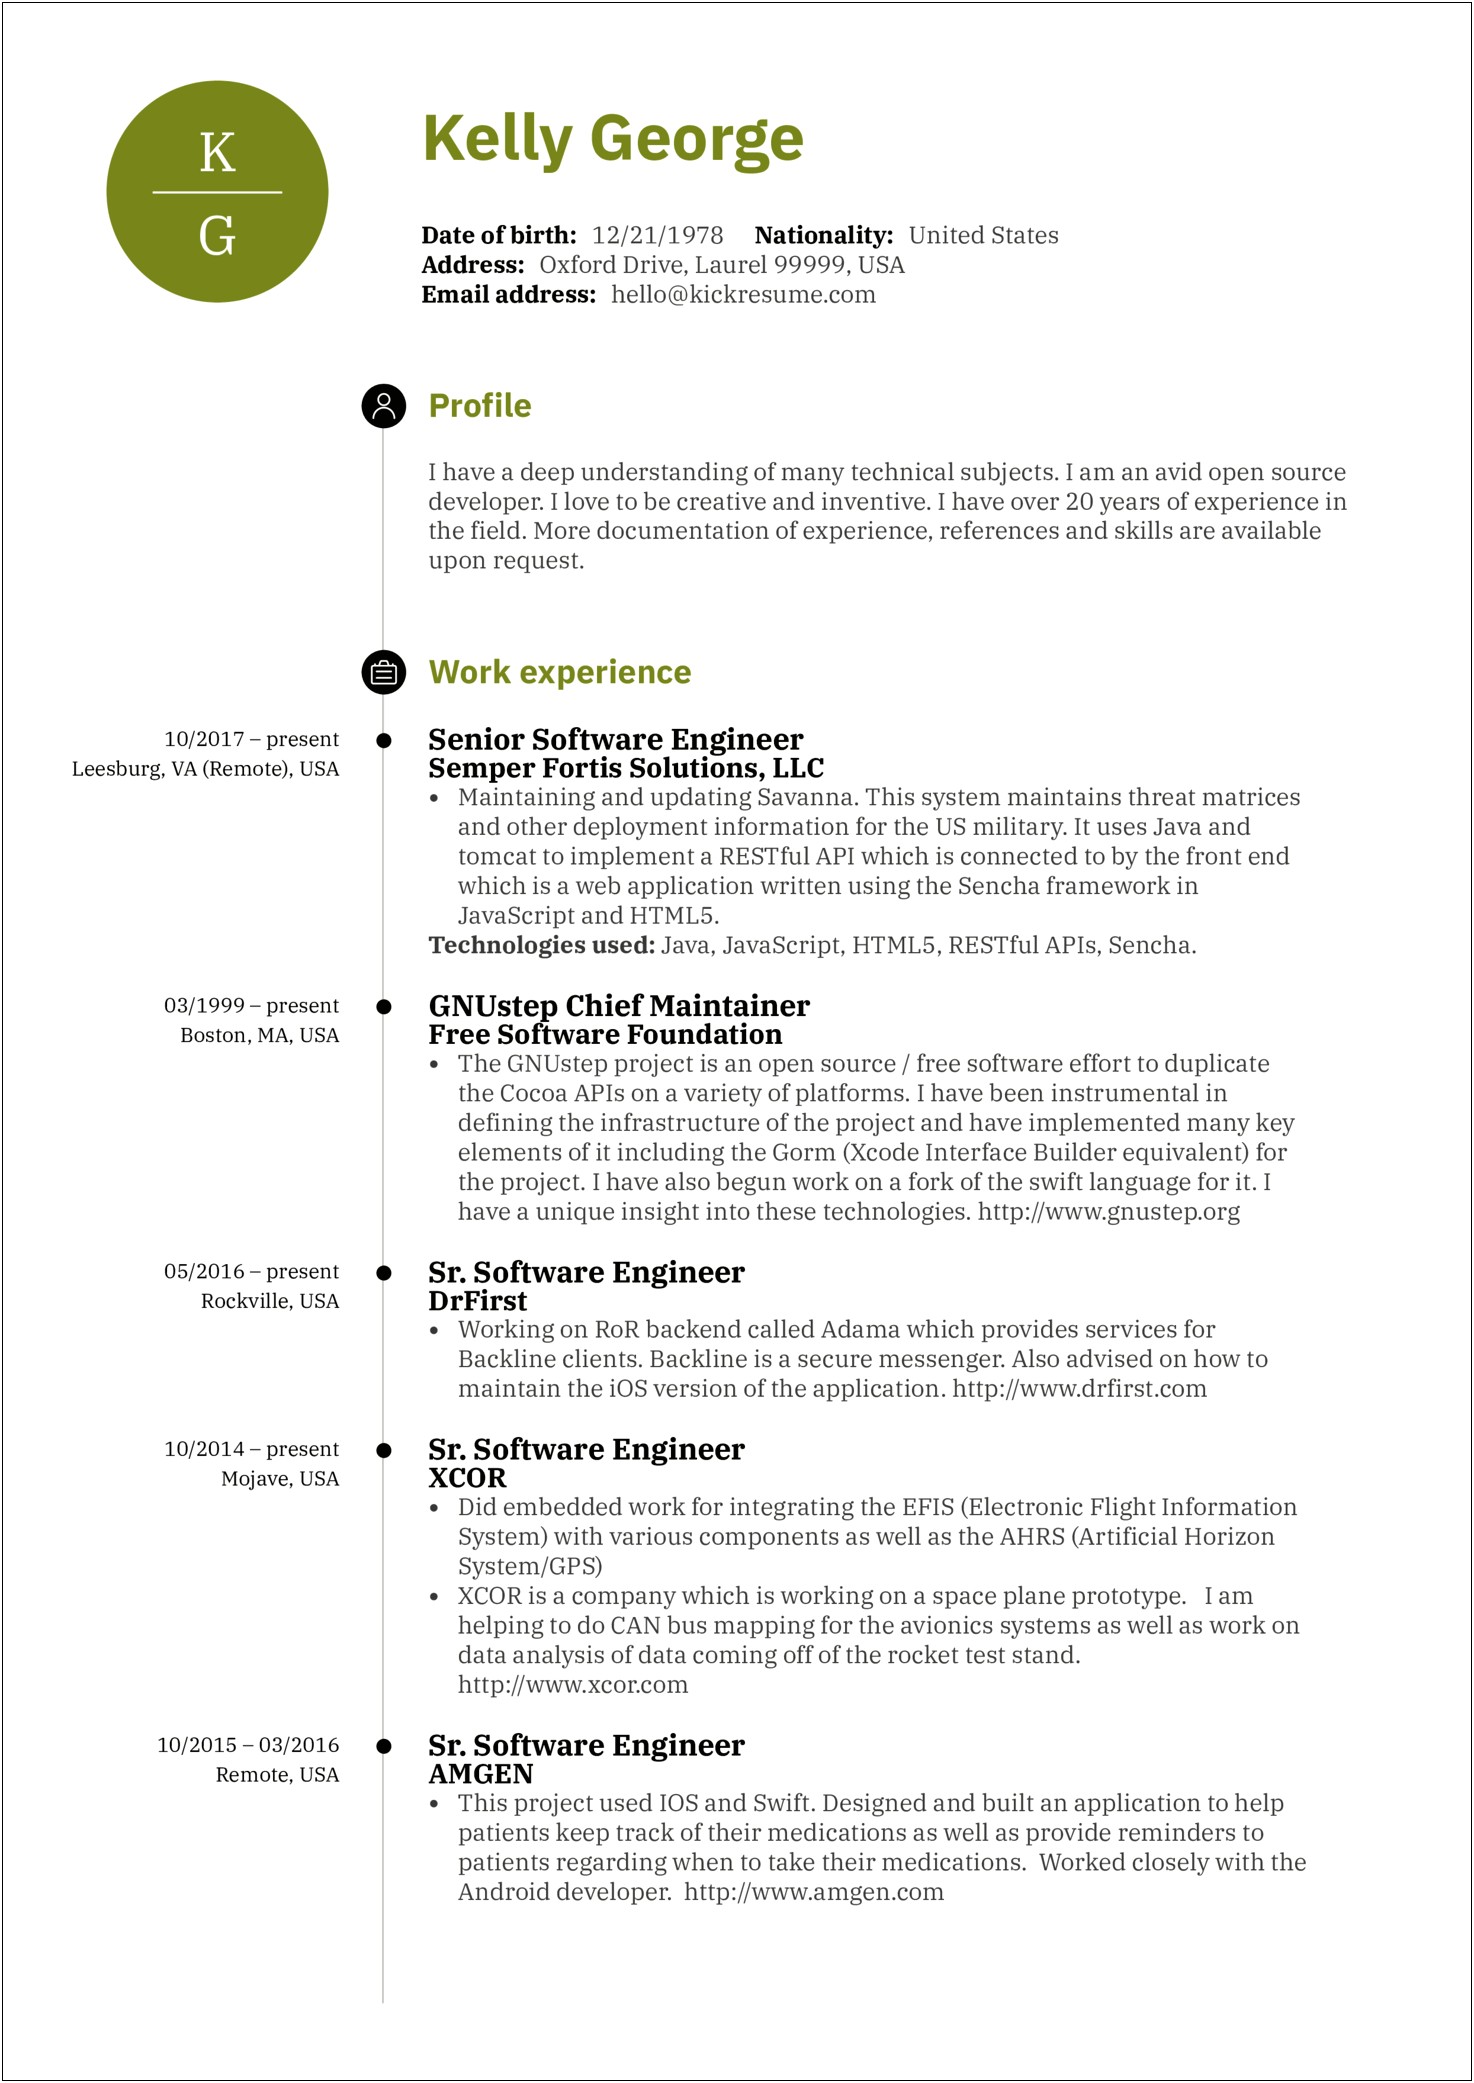 Resume Examples With References Upon Request